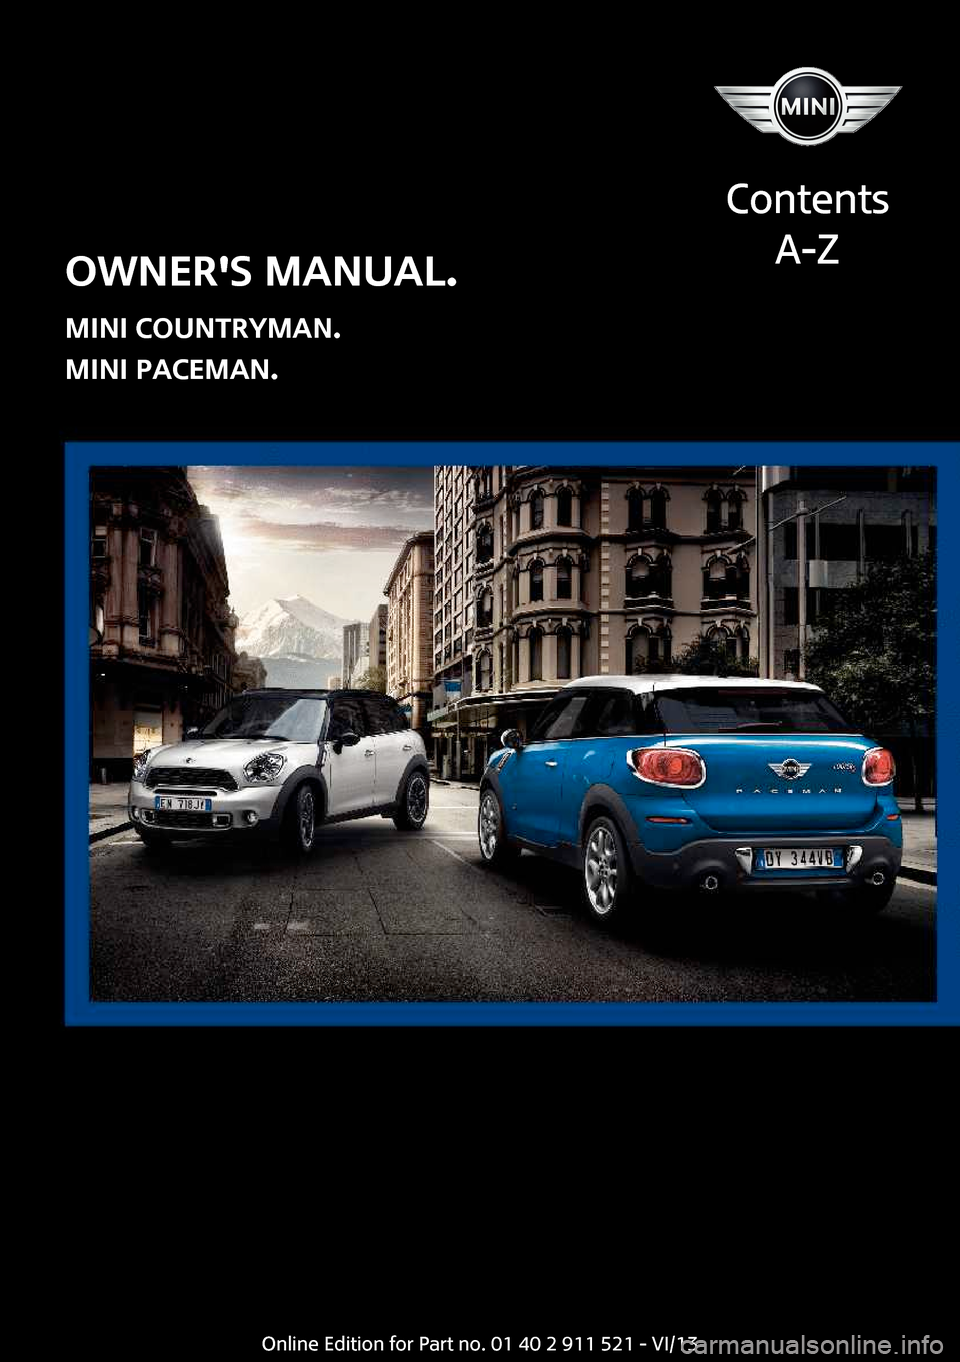 MINI Paceman 2014  Owners Manual Owners Manual.
MINI Countryman.
MINI Paceman.
Contents
A-ZOnline Edition for Part no. 01 40 2 911 521 - VI/13  